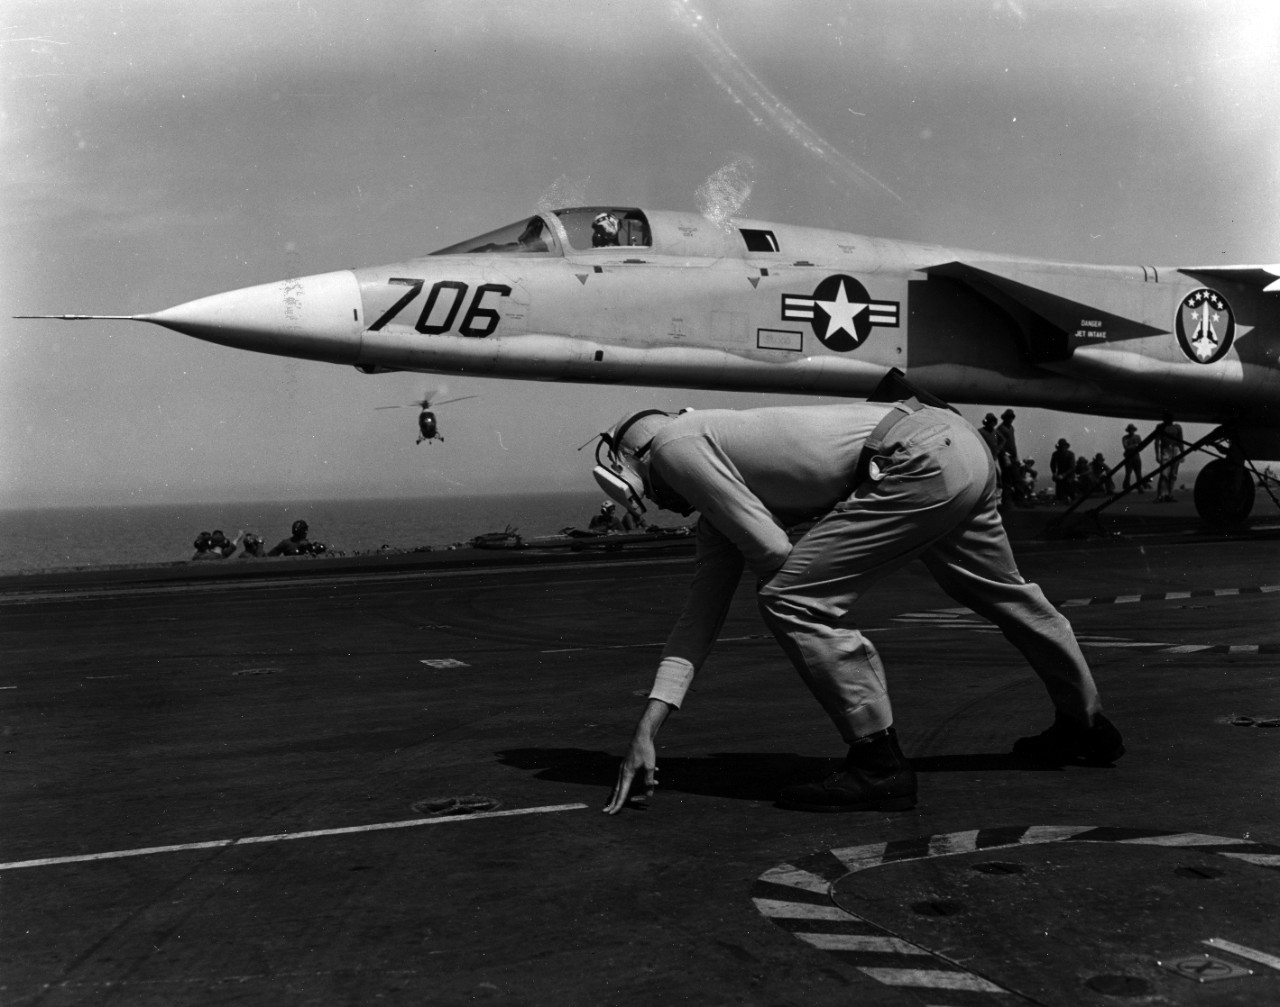 A3J Vigilante given the "go" signal by catapult officer, angel in background. Aboard the USS Enterprise (CVAN-65) during Exercise Fall Trap.